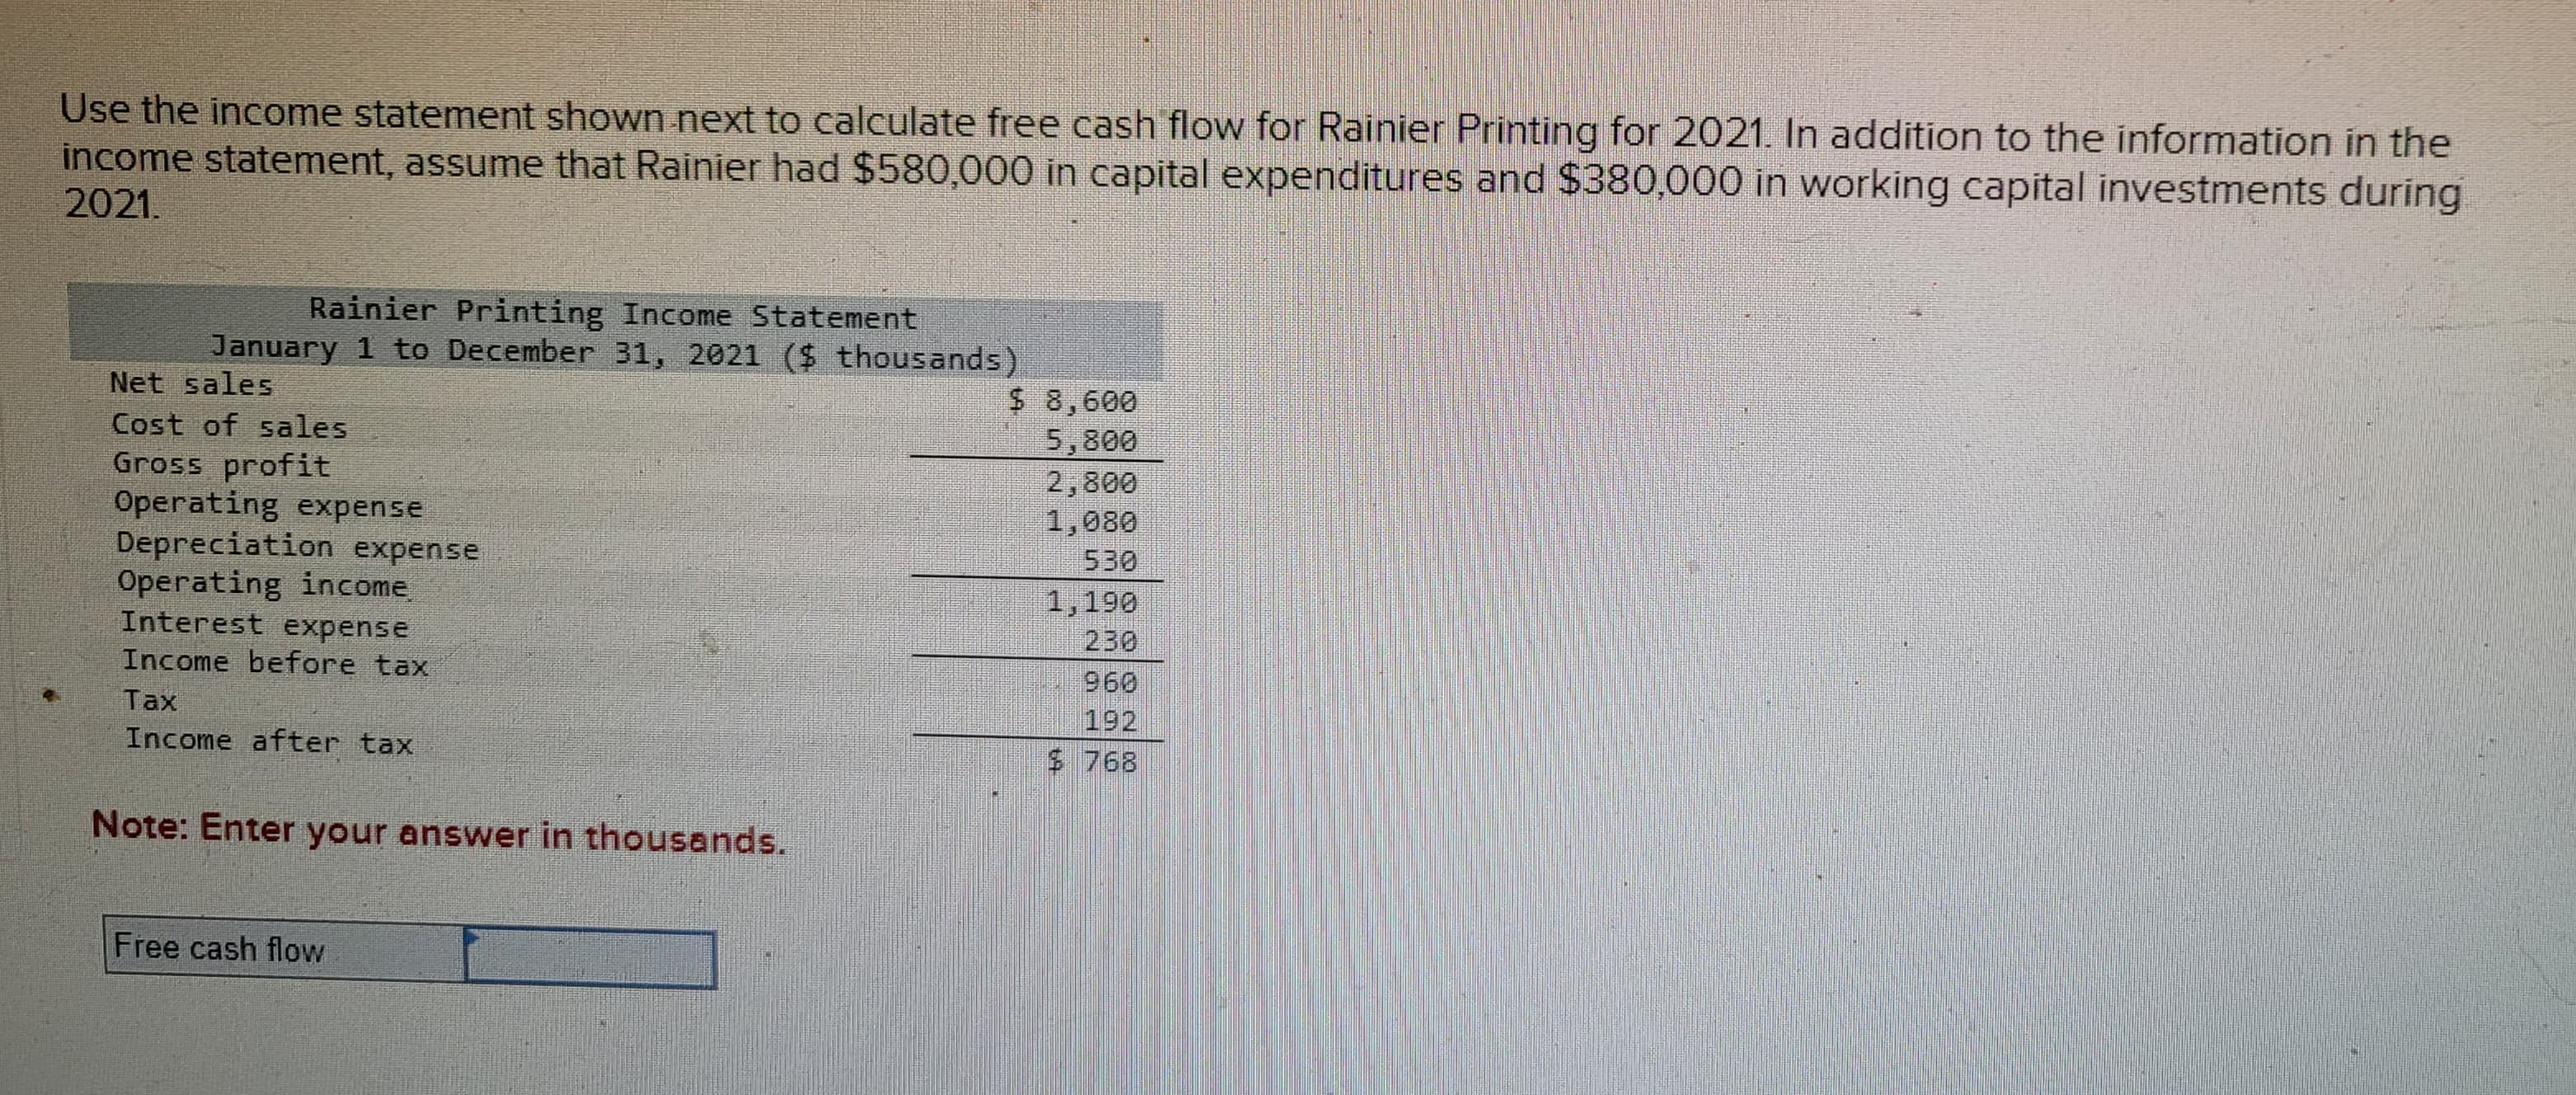 Use the income statement shown next to calculate free cash flow for Rainier Printing for 2021. In addition to the information in the
income statement, assume that Rainier had $580,000 in capital expenditures and $380,000 in working capital investments during
2021.
Rainier Printing Income Statement
January 1 to December 31, 2021 ($ thousands)
Net sales
Cost of sales
Gross profit
Operating expense
Depreciation expense
Operating income
Interest expense
Income before tax
Tax
Income after tax
Note: Enter your answer in thousands.
Free cash flow
$
8,600
5,800
2,800
1,080
530
1,190
960
$ 768